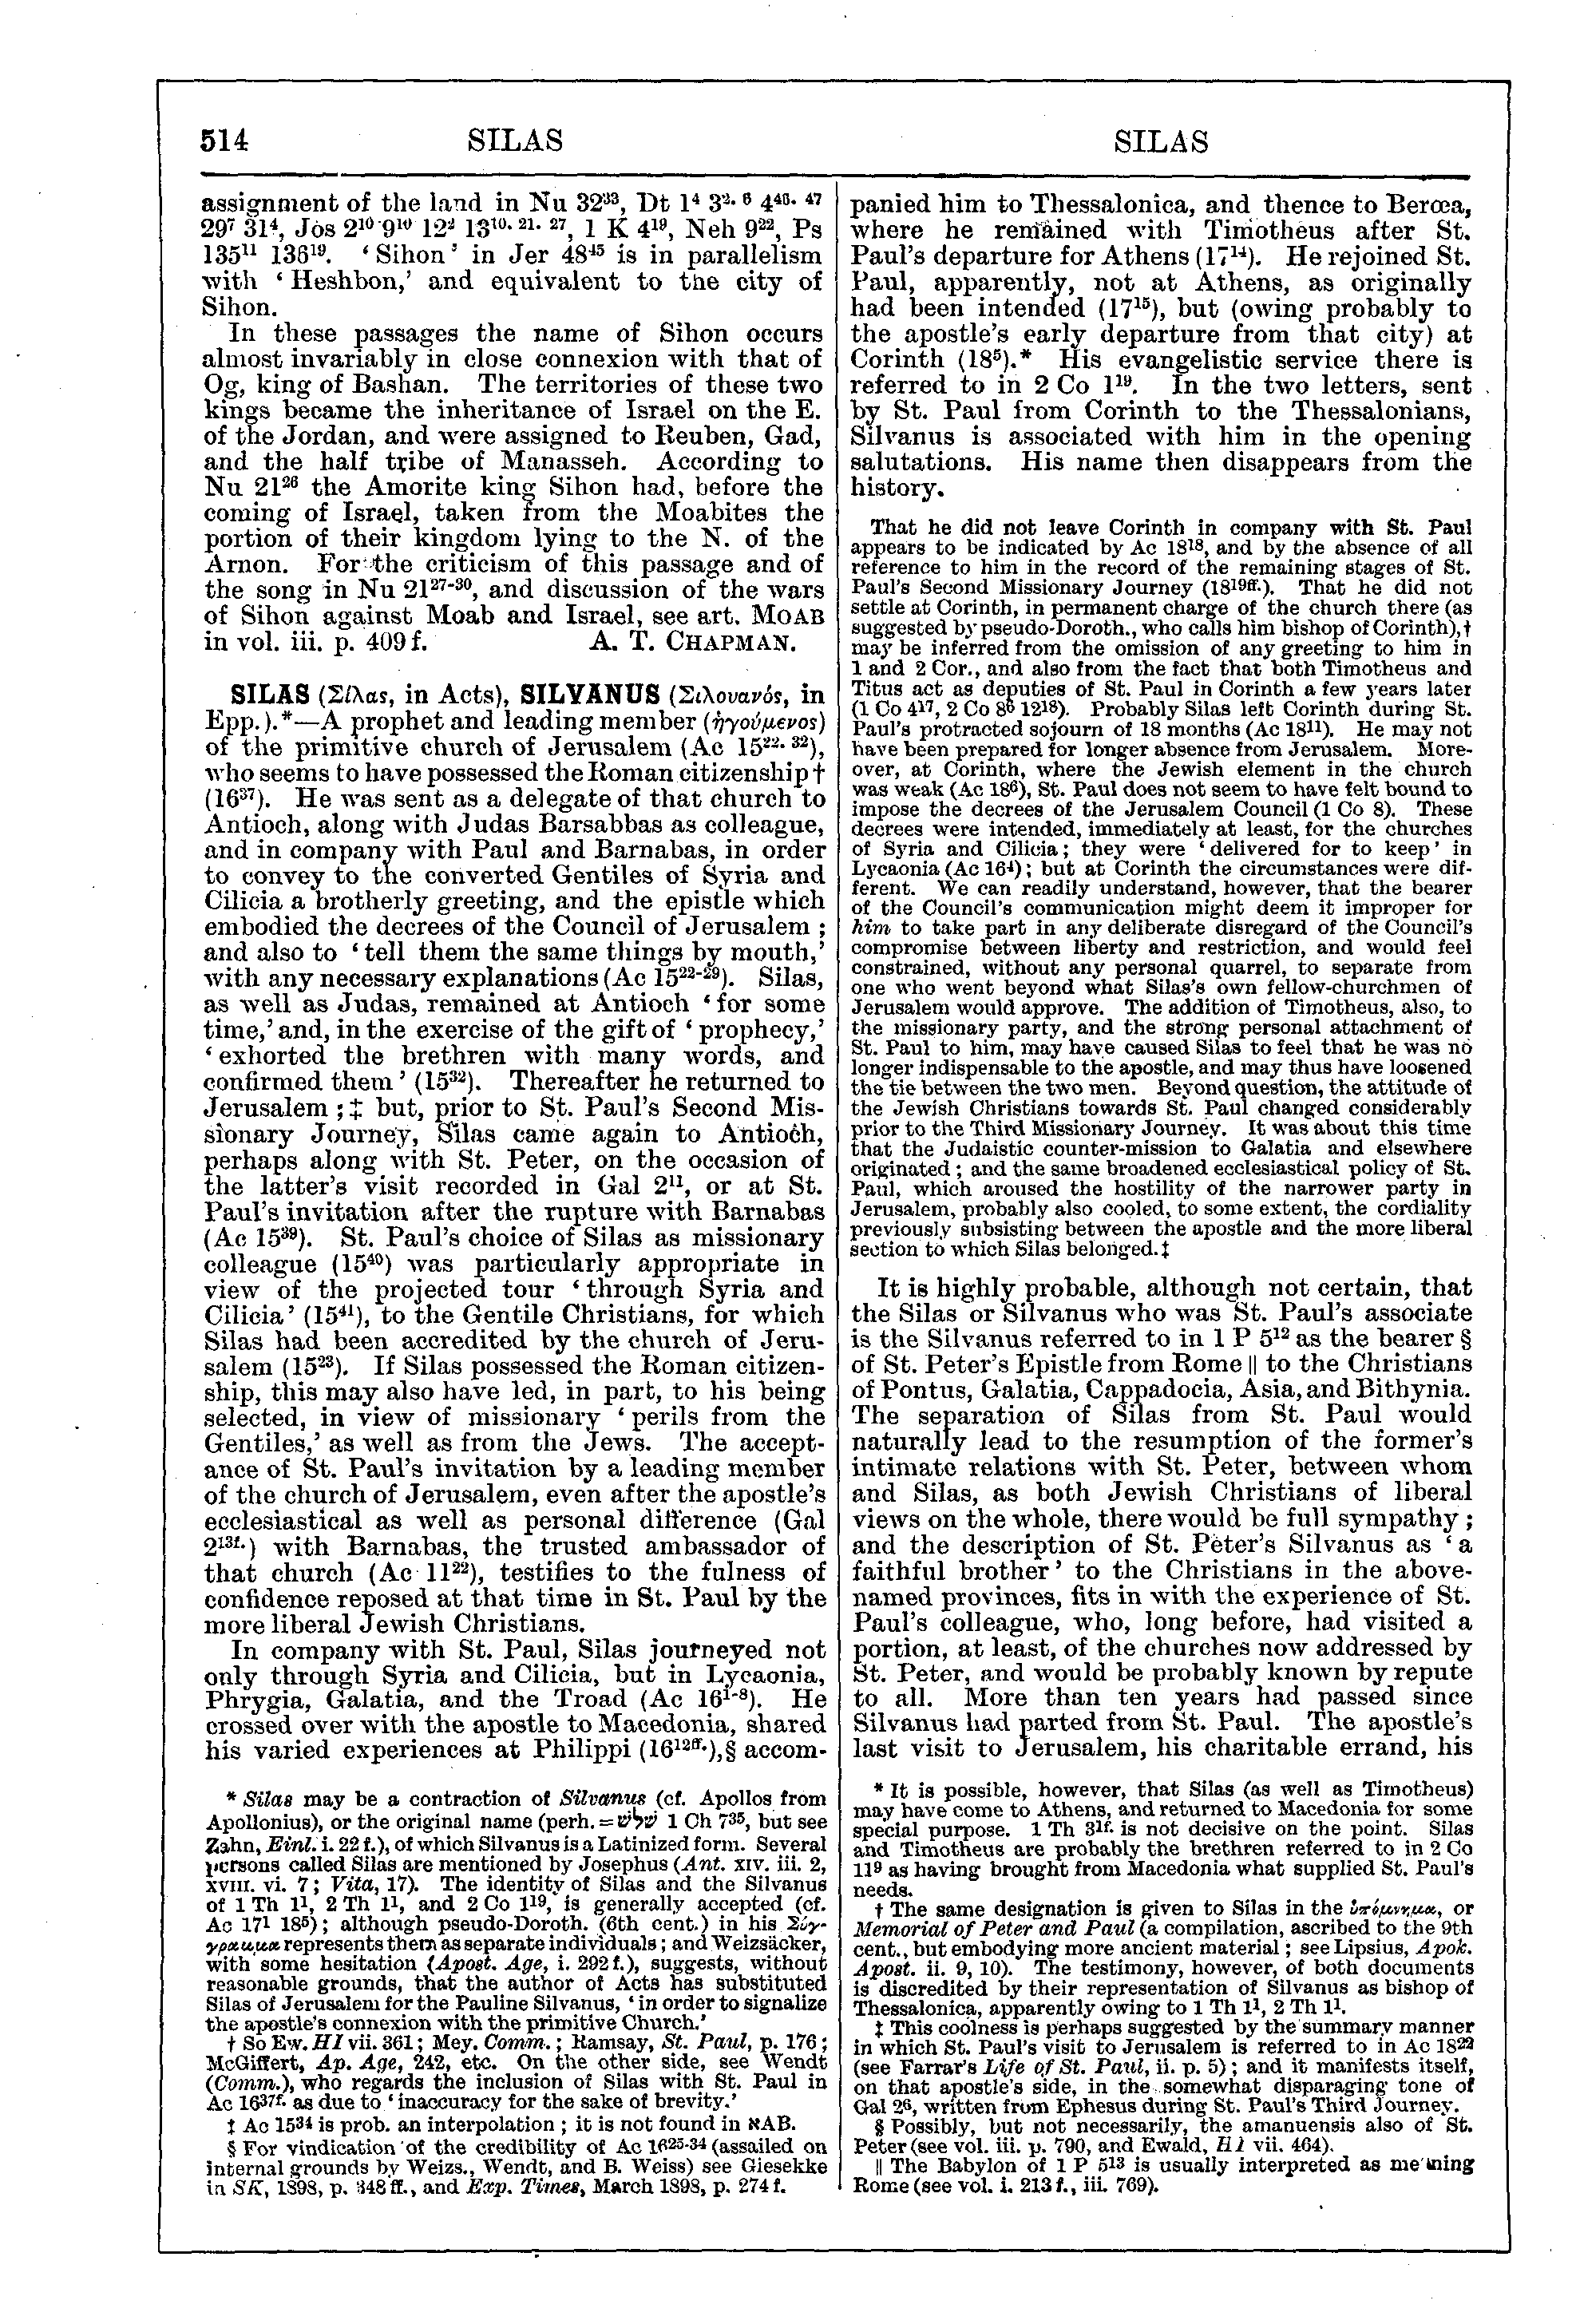 Image of page 514